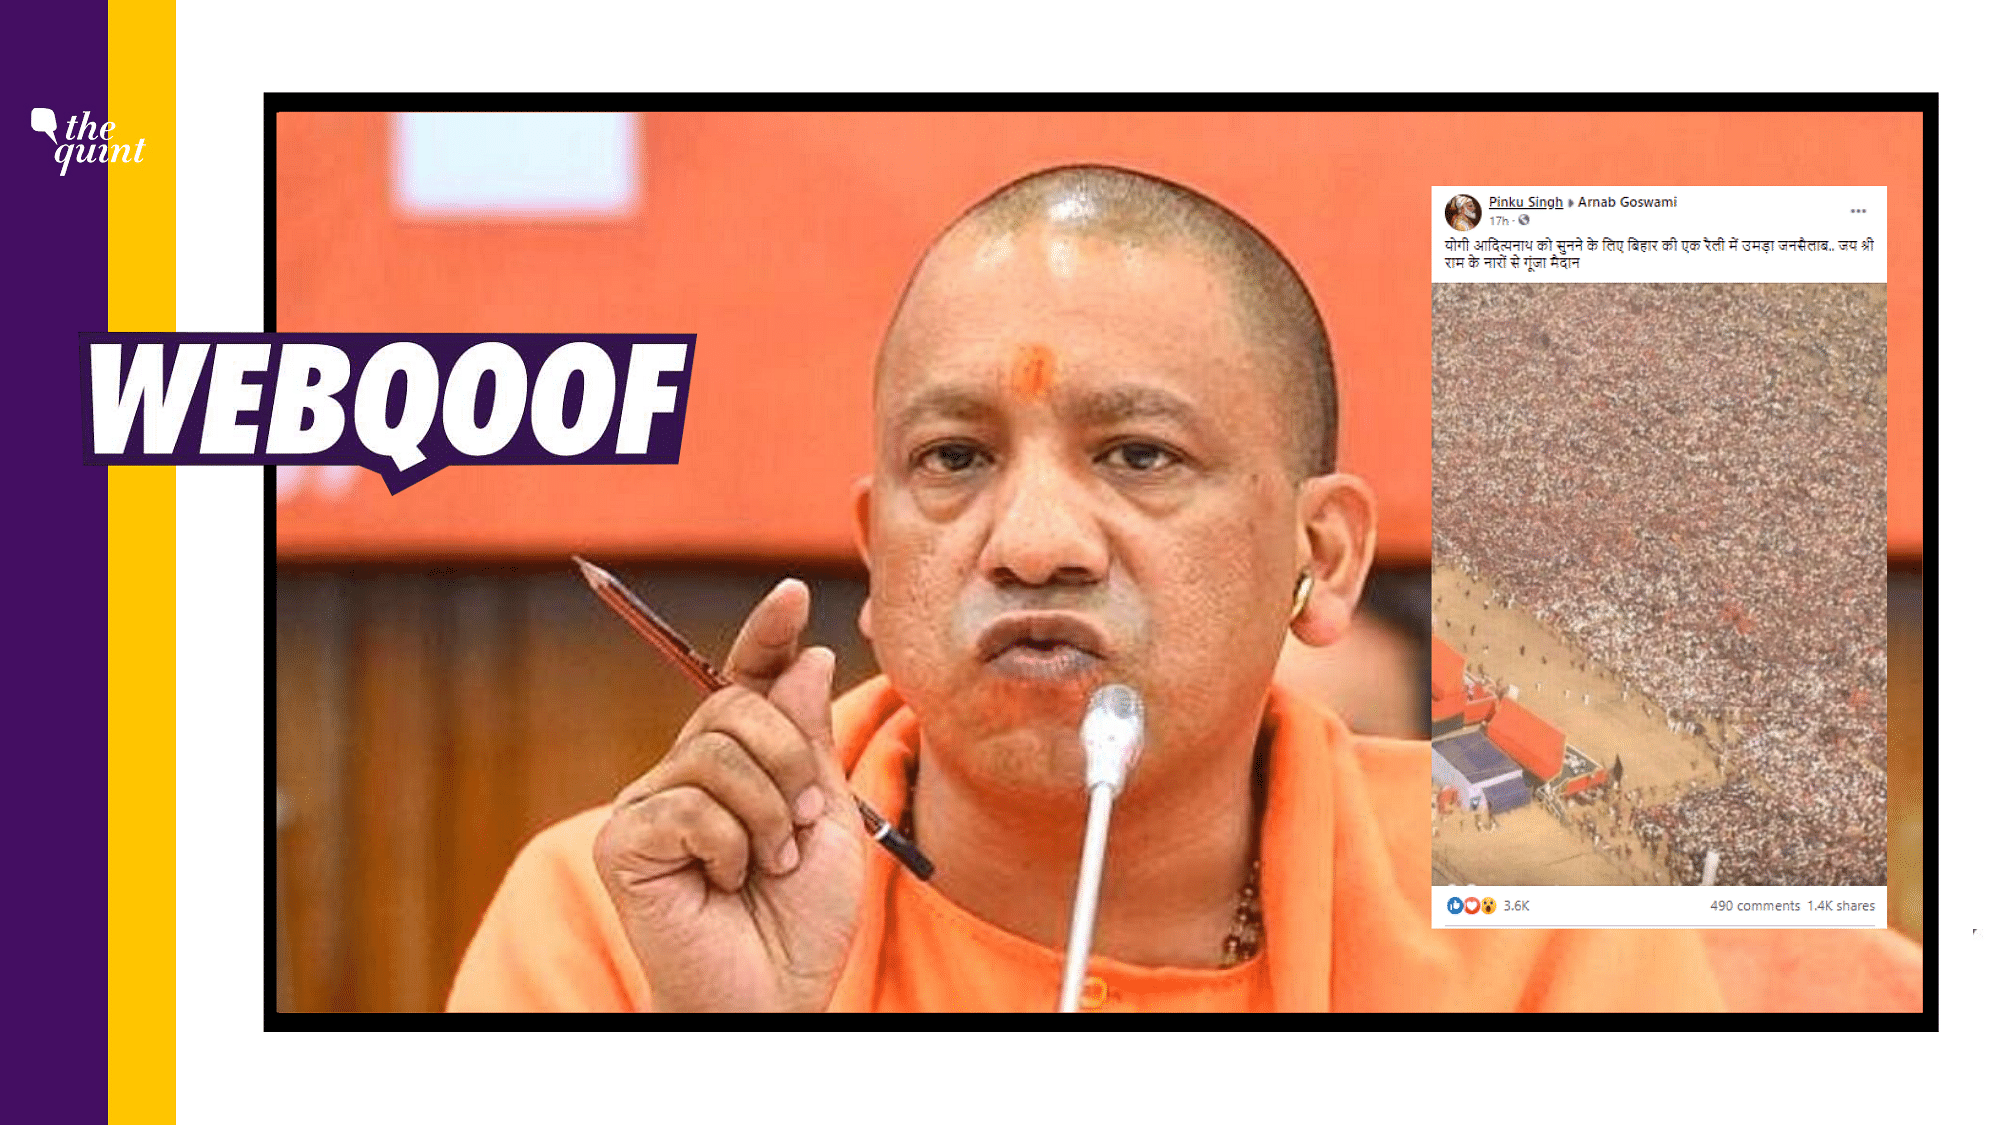 The viral image is actually old and not of Adityanath’s recent rally.